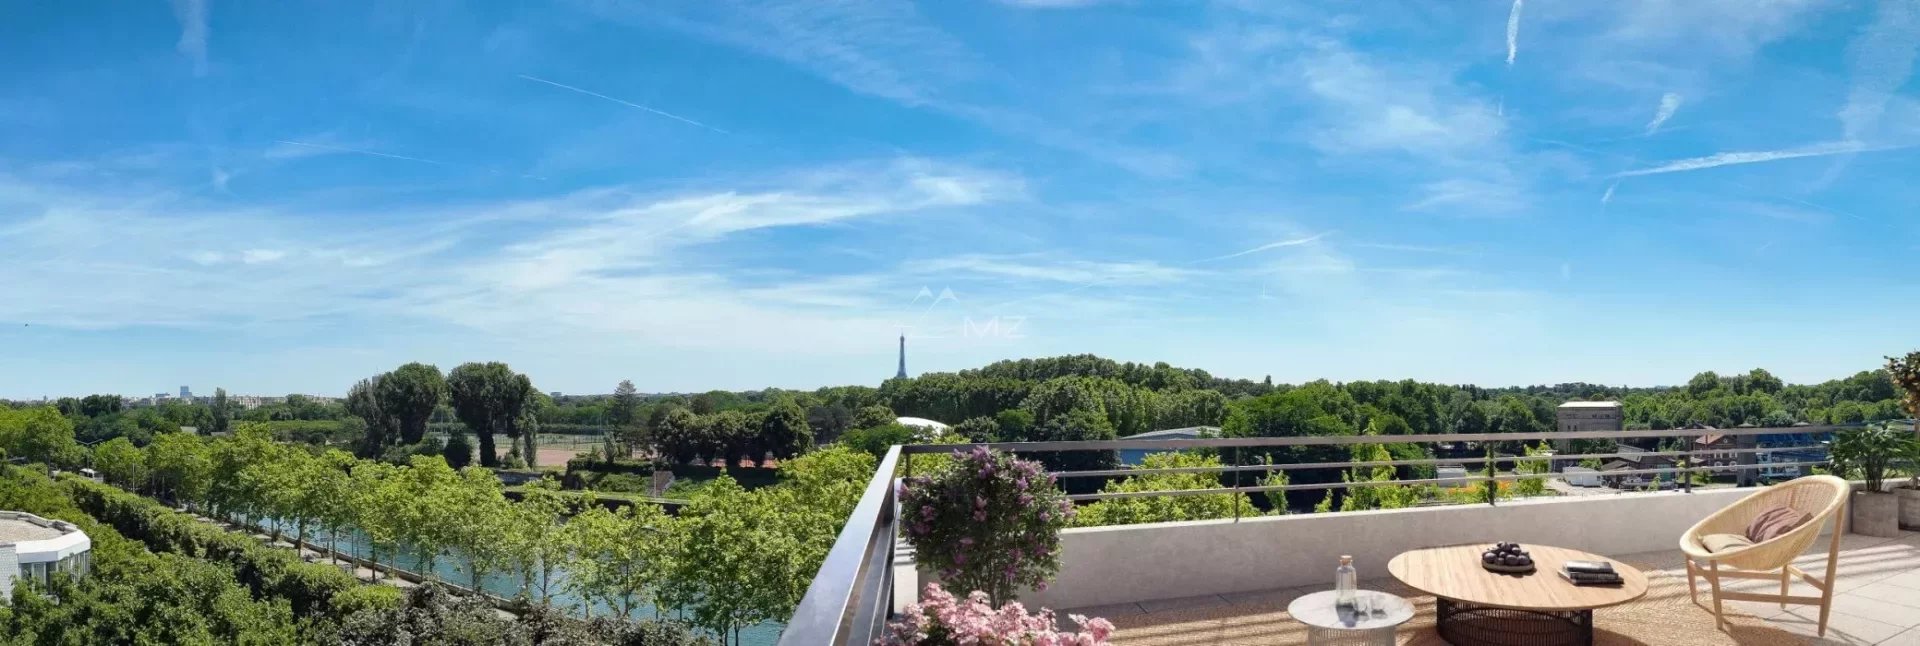 A Vendre - Programme Neuf - Appartement 2 chambres - Suresnes (92)